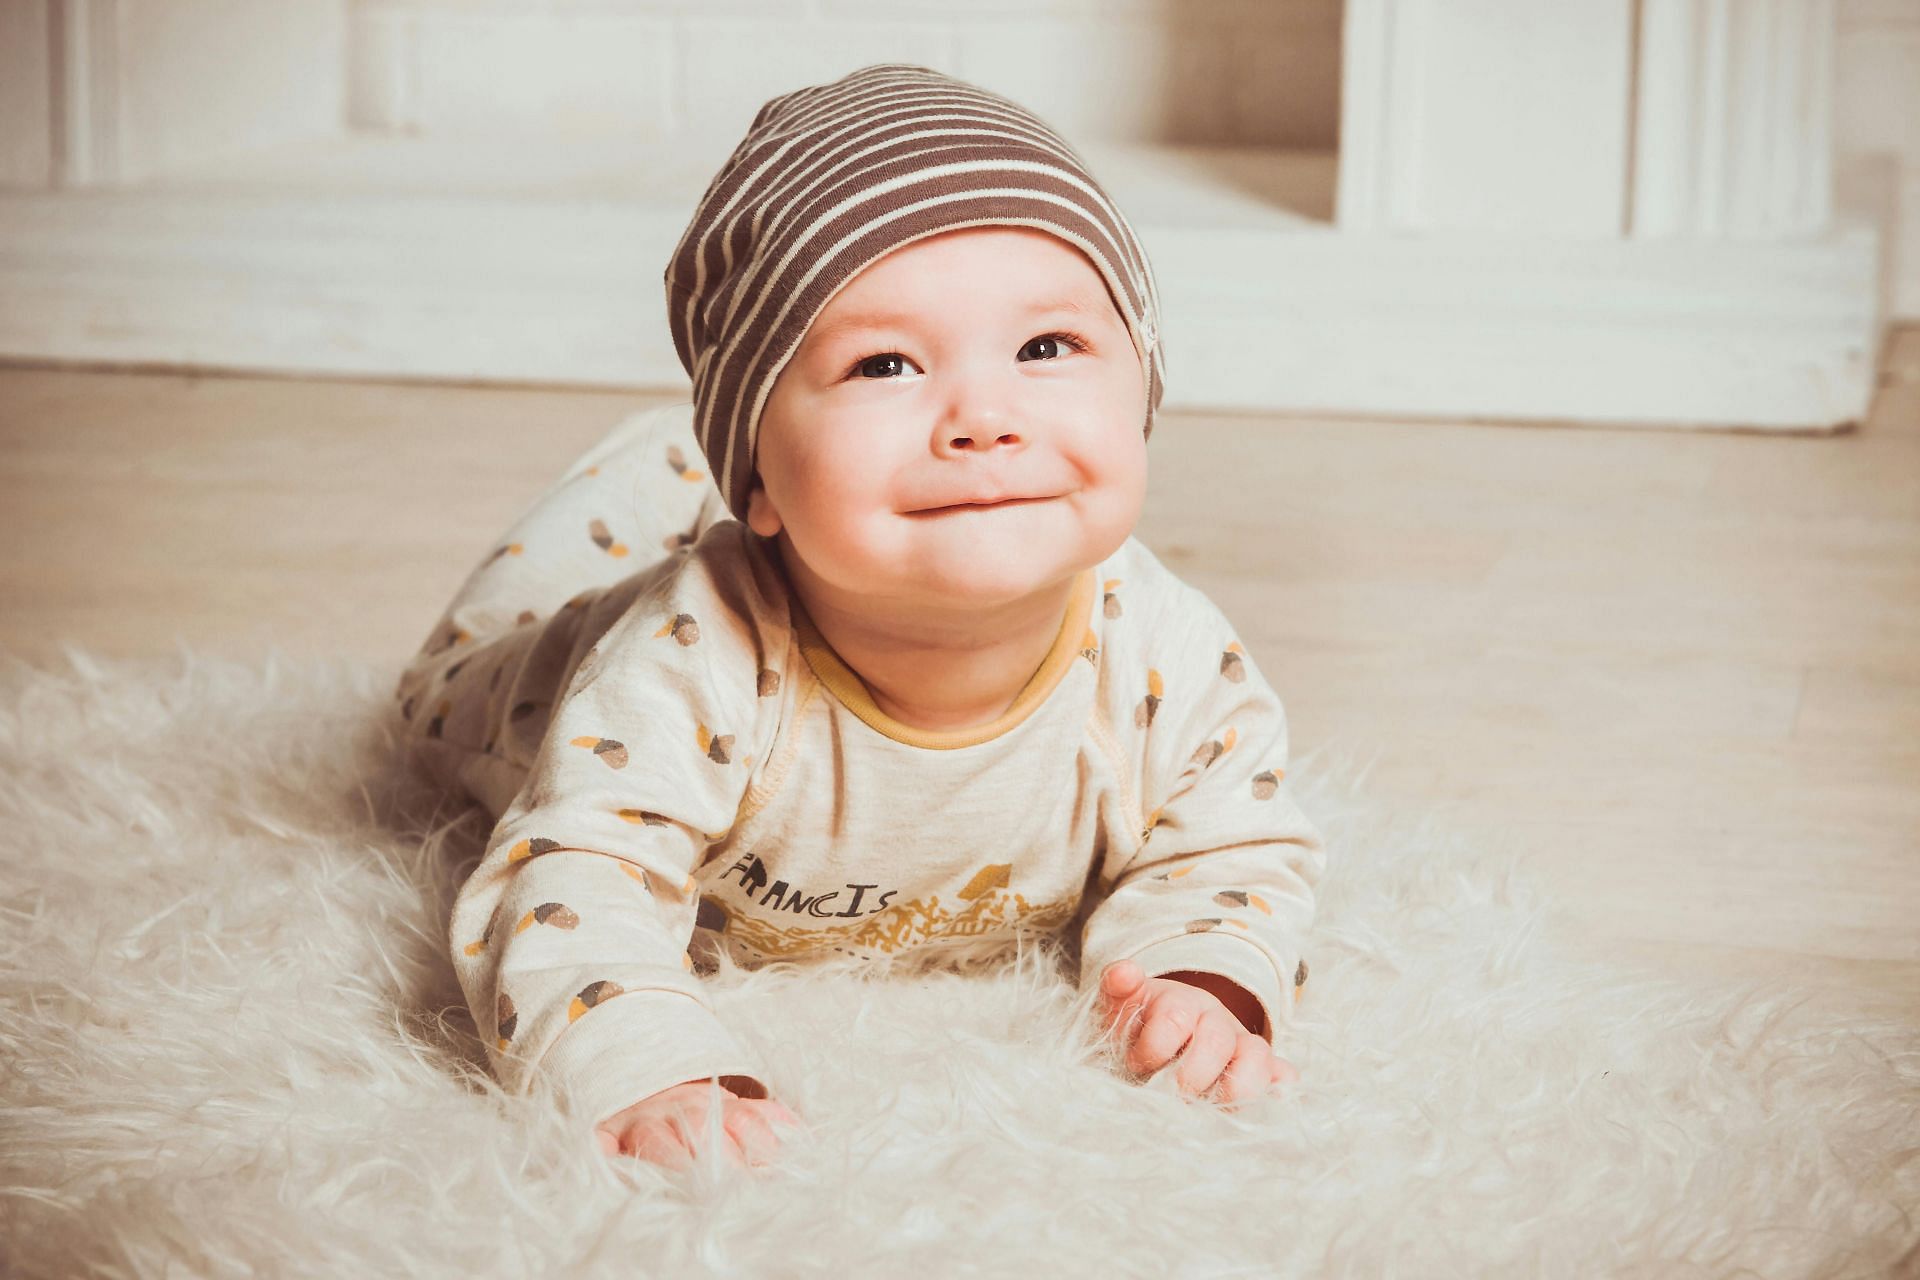 when can babies have juice (image sourced via Pexels / Photo by Kindel Media)